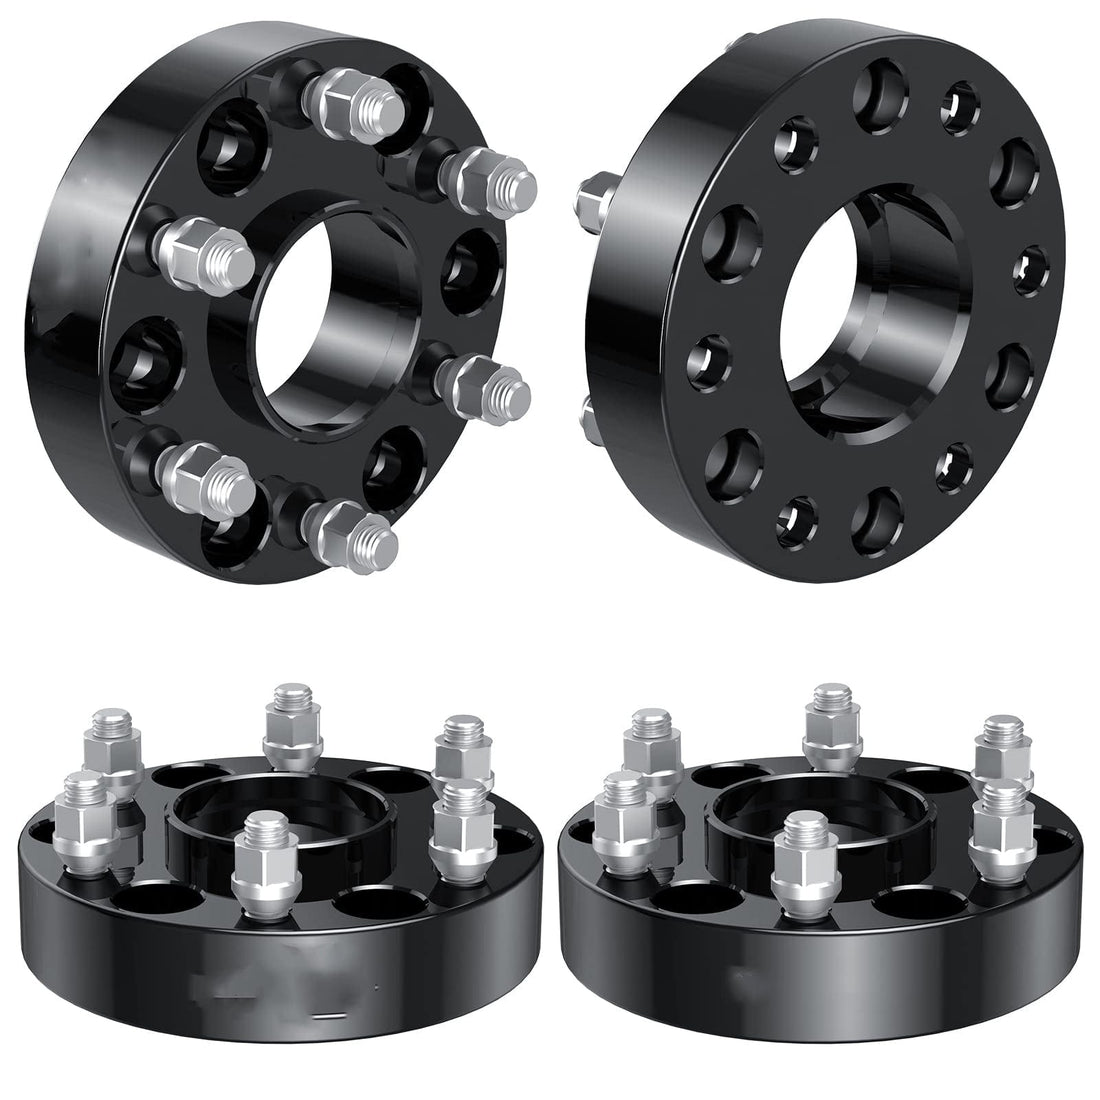 GARVEE 6x5.5 Wheel Spacers Compatible with Tacoma, 1.5" Forged Hub Centric M12x1.5 Stud Hub Bore 106mm